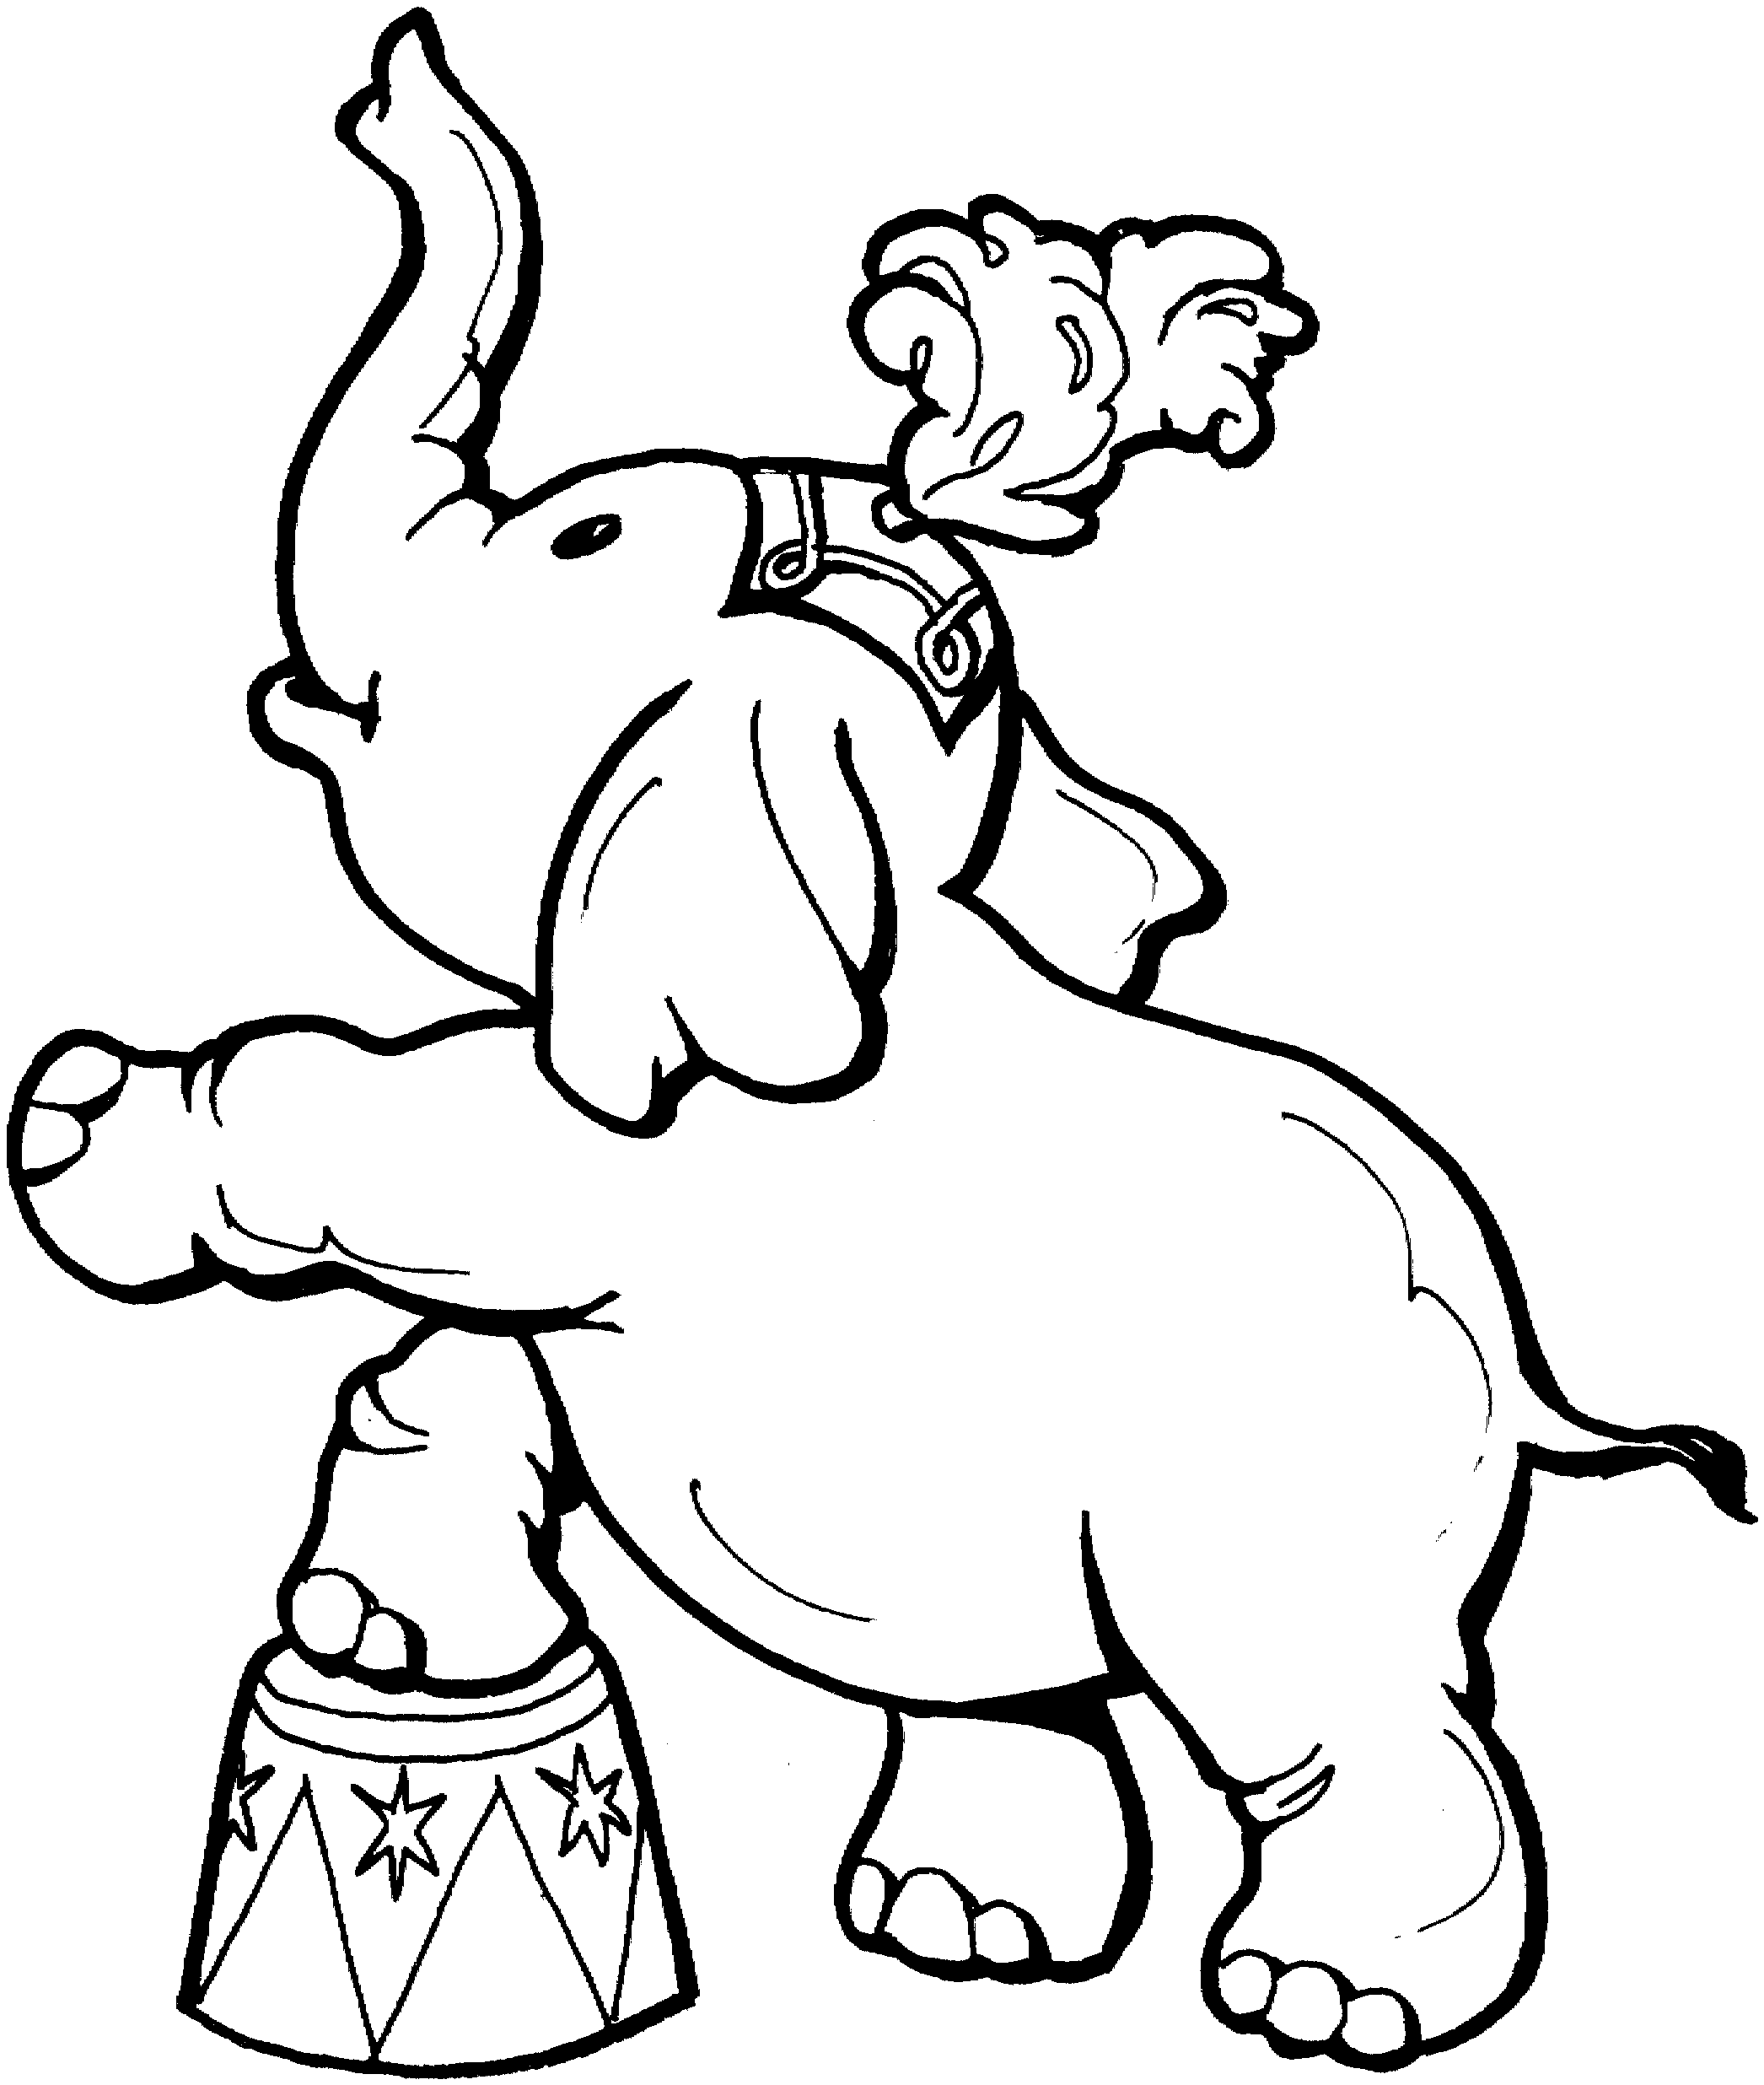 coloring pages elephants baby elephant coloring pages to download and print for free pages elephants coloring 